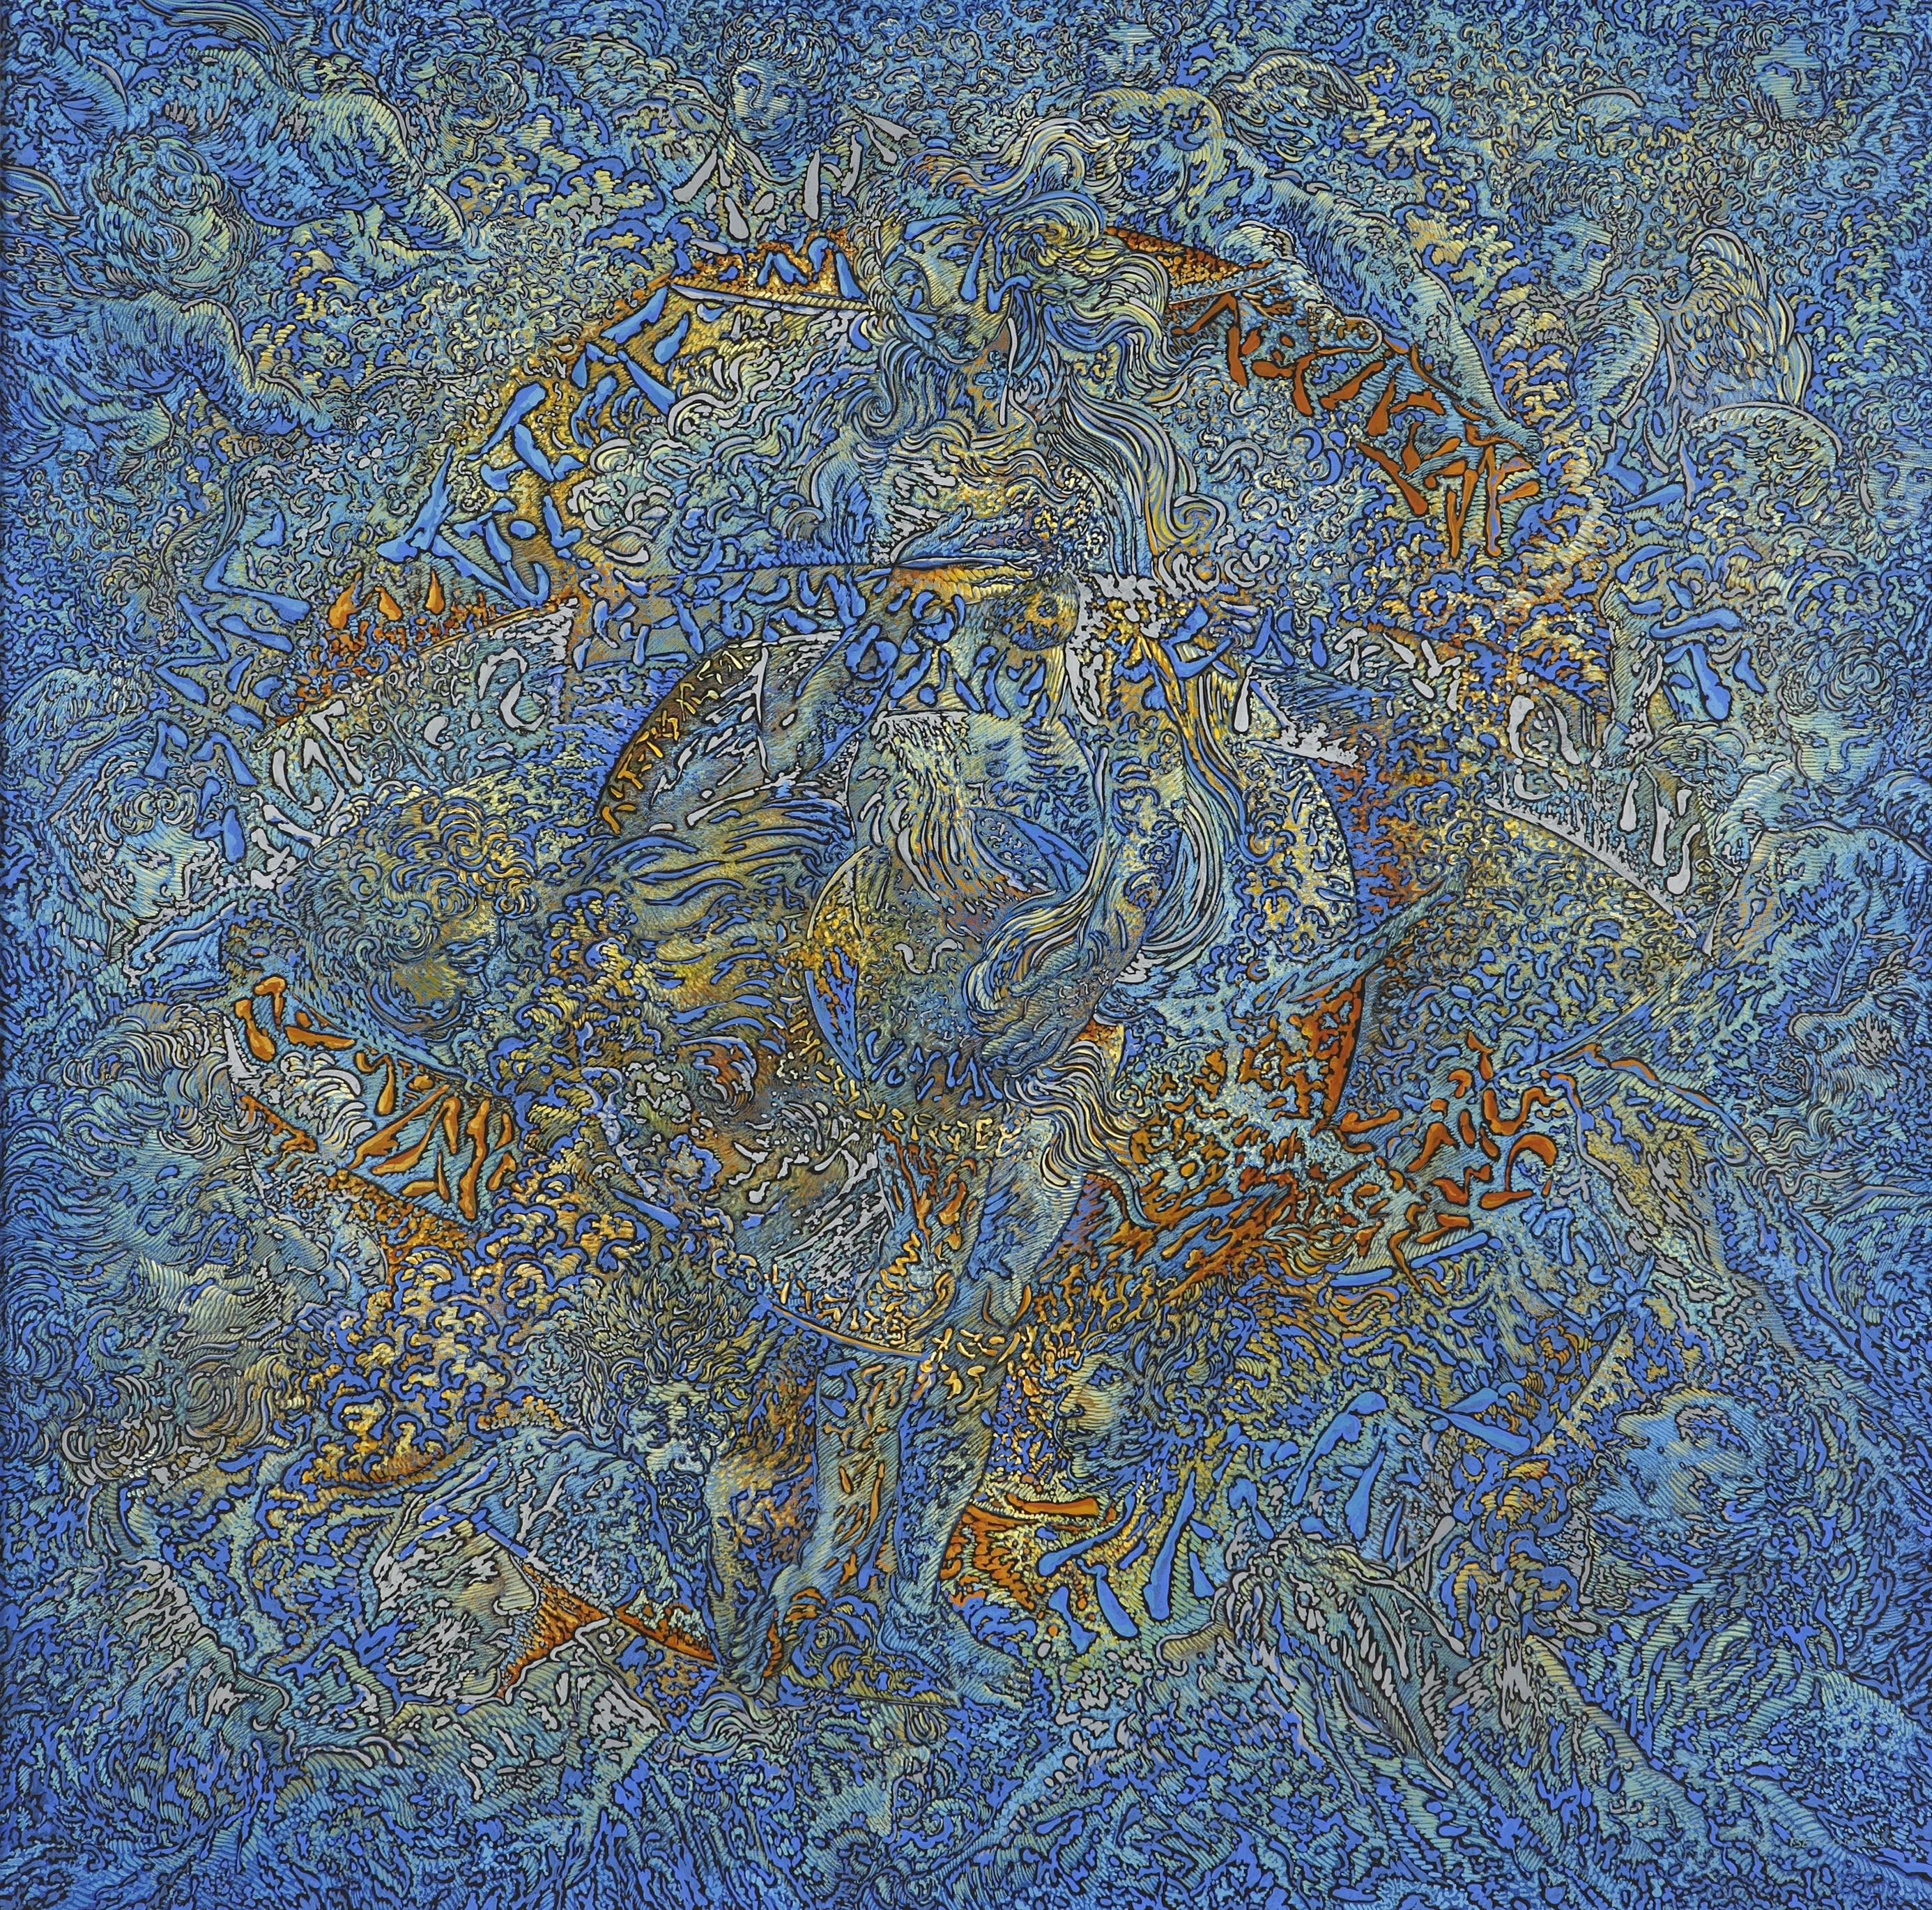 Béatrice Bescond Abstract Painting - "Vénus", Blue and Gold Mythological Goddess with Angels Squared Acrylic Painting